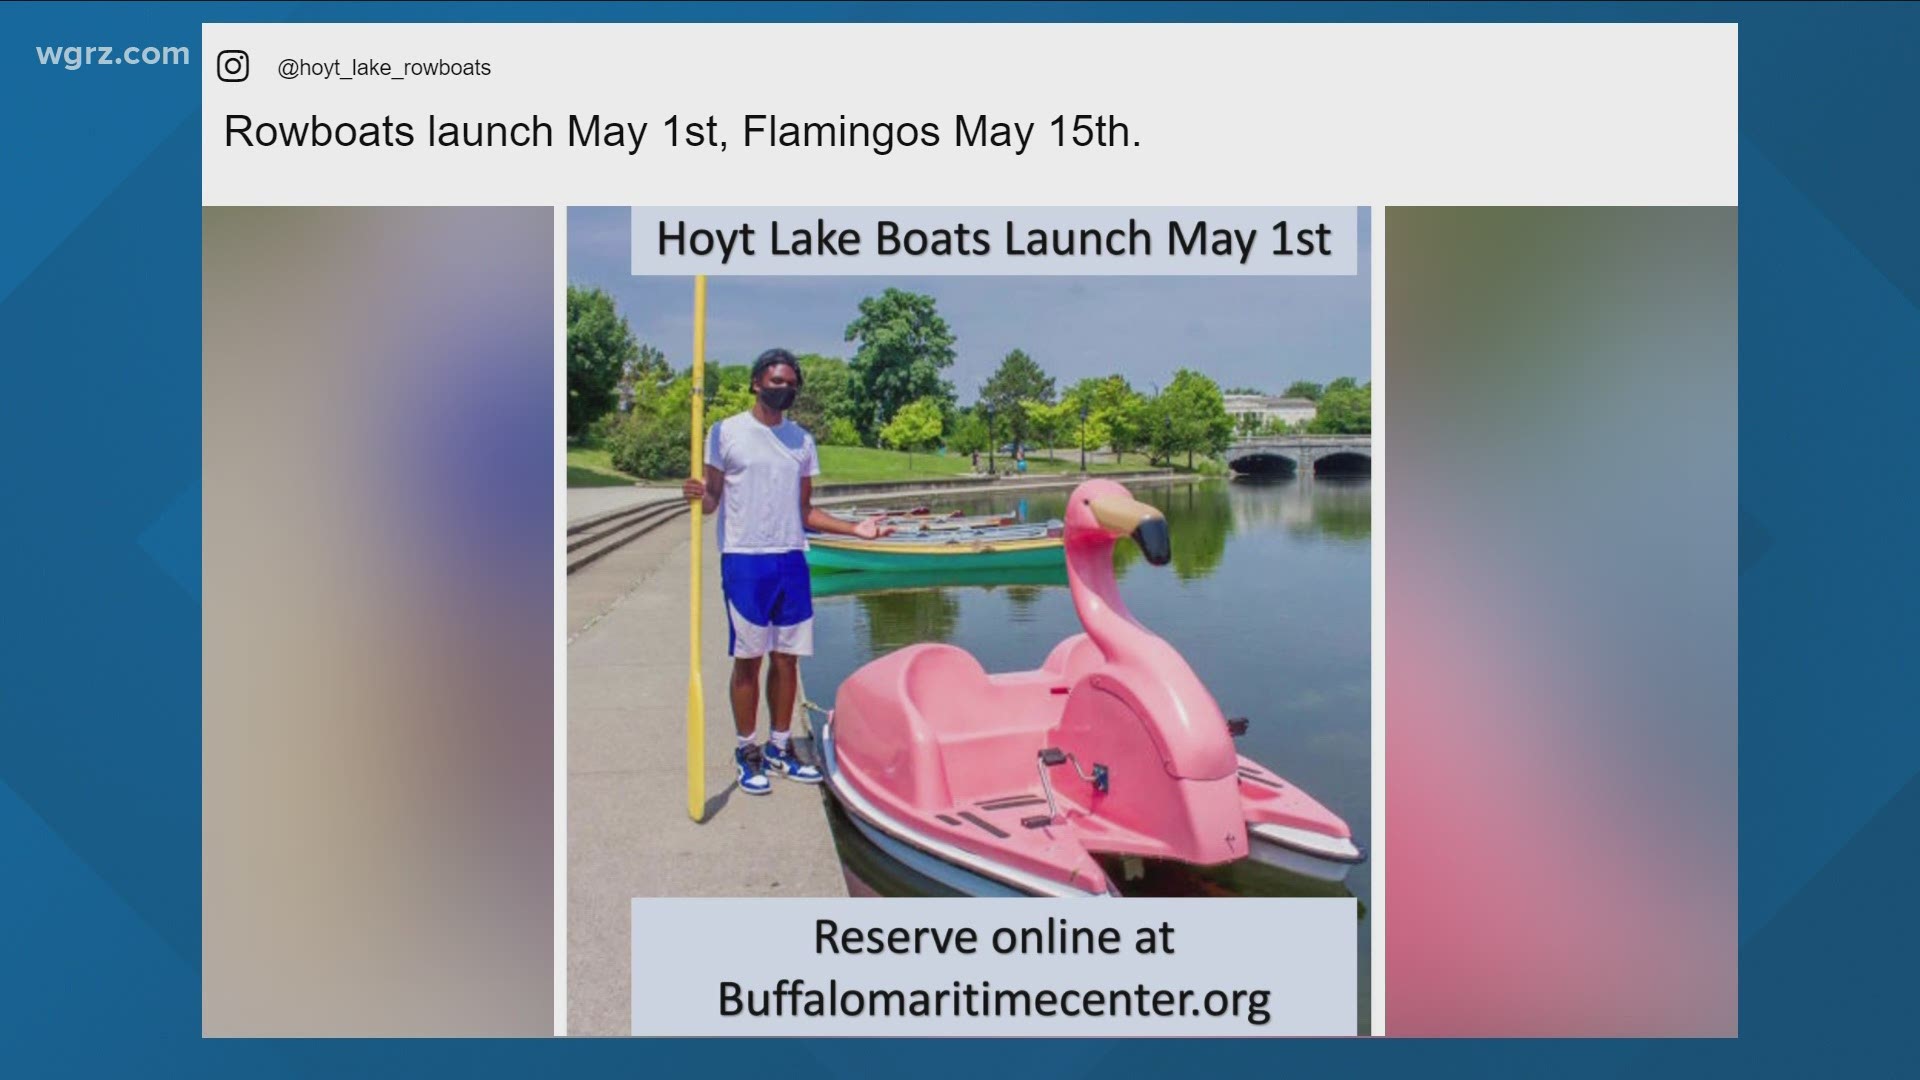 Boats back in Hoyt Lake starting May 1st